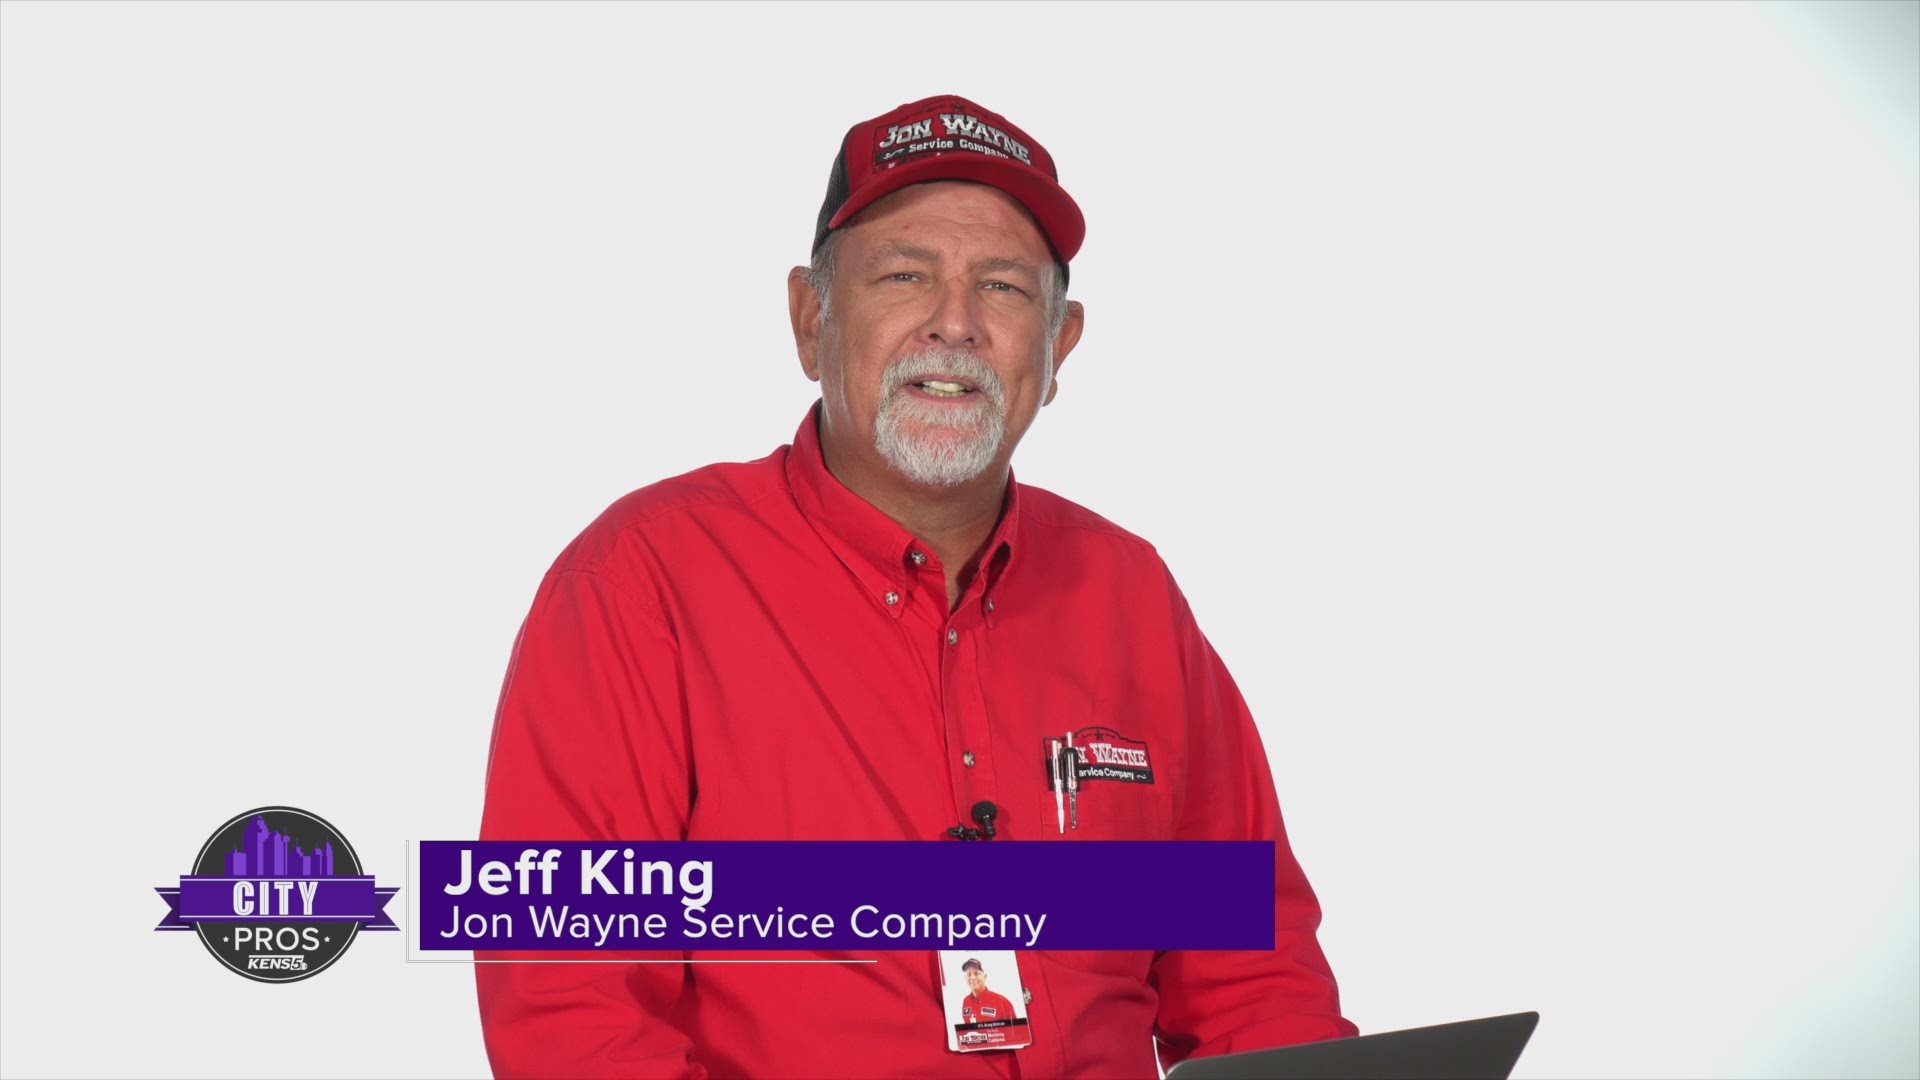 The technicians with Jon Wayne Service Company can help make sure you're ready for the transition from summer A/C to fall and winter heating season.